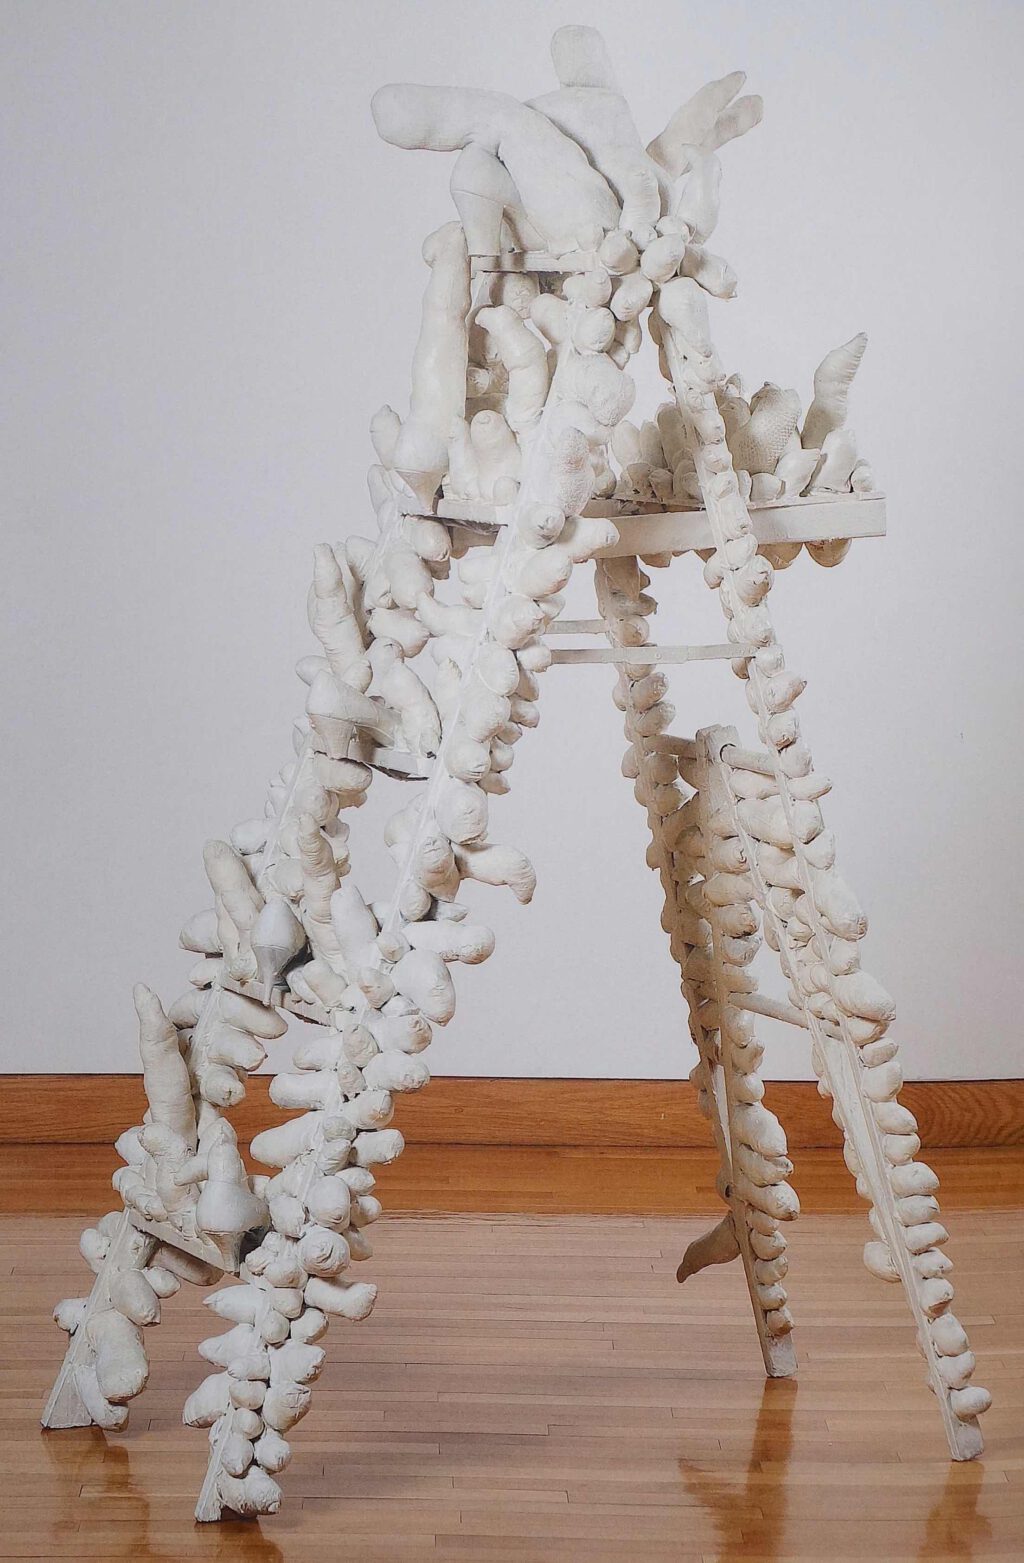 KUSAMA Yayoi Ladder 1963, mixed media, 167.6 x 66 x 96.5 cm, Des Moines Art Center Permanent Collection; Gift of Hanford Yang, New York